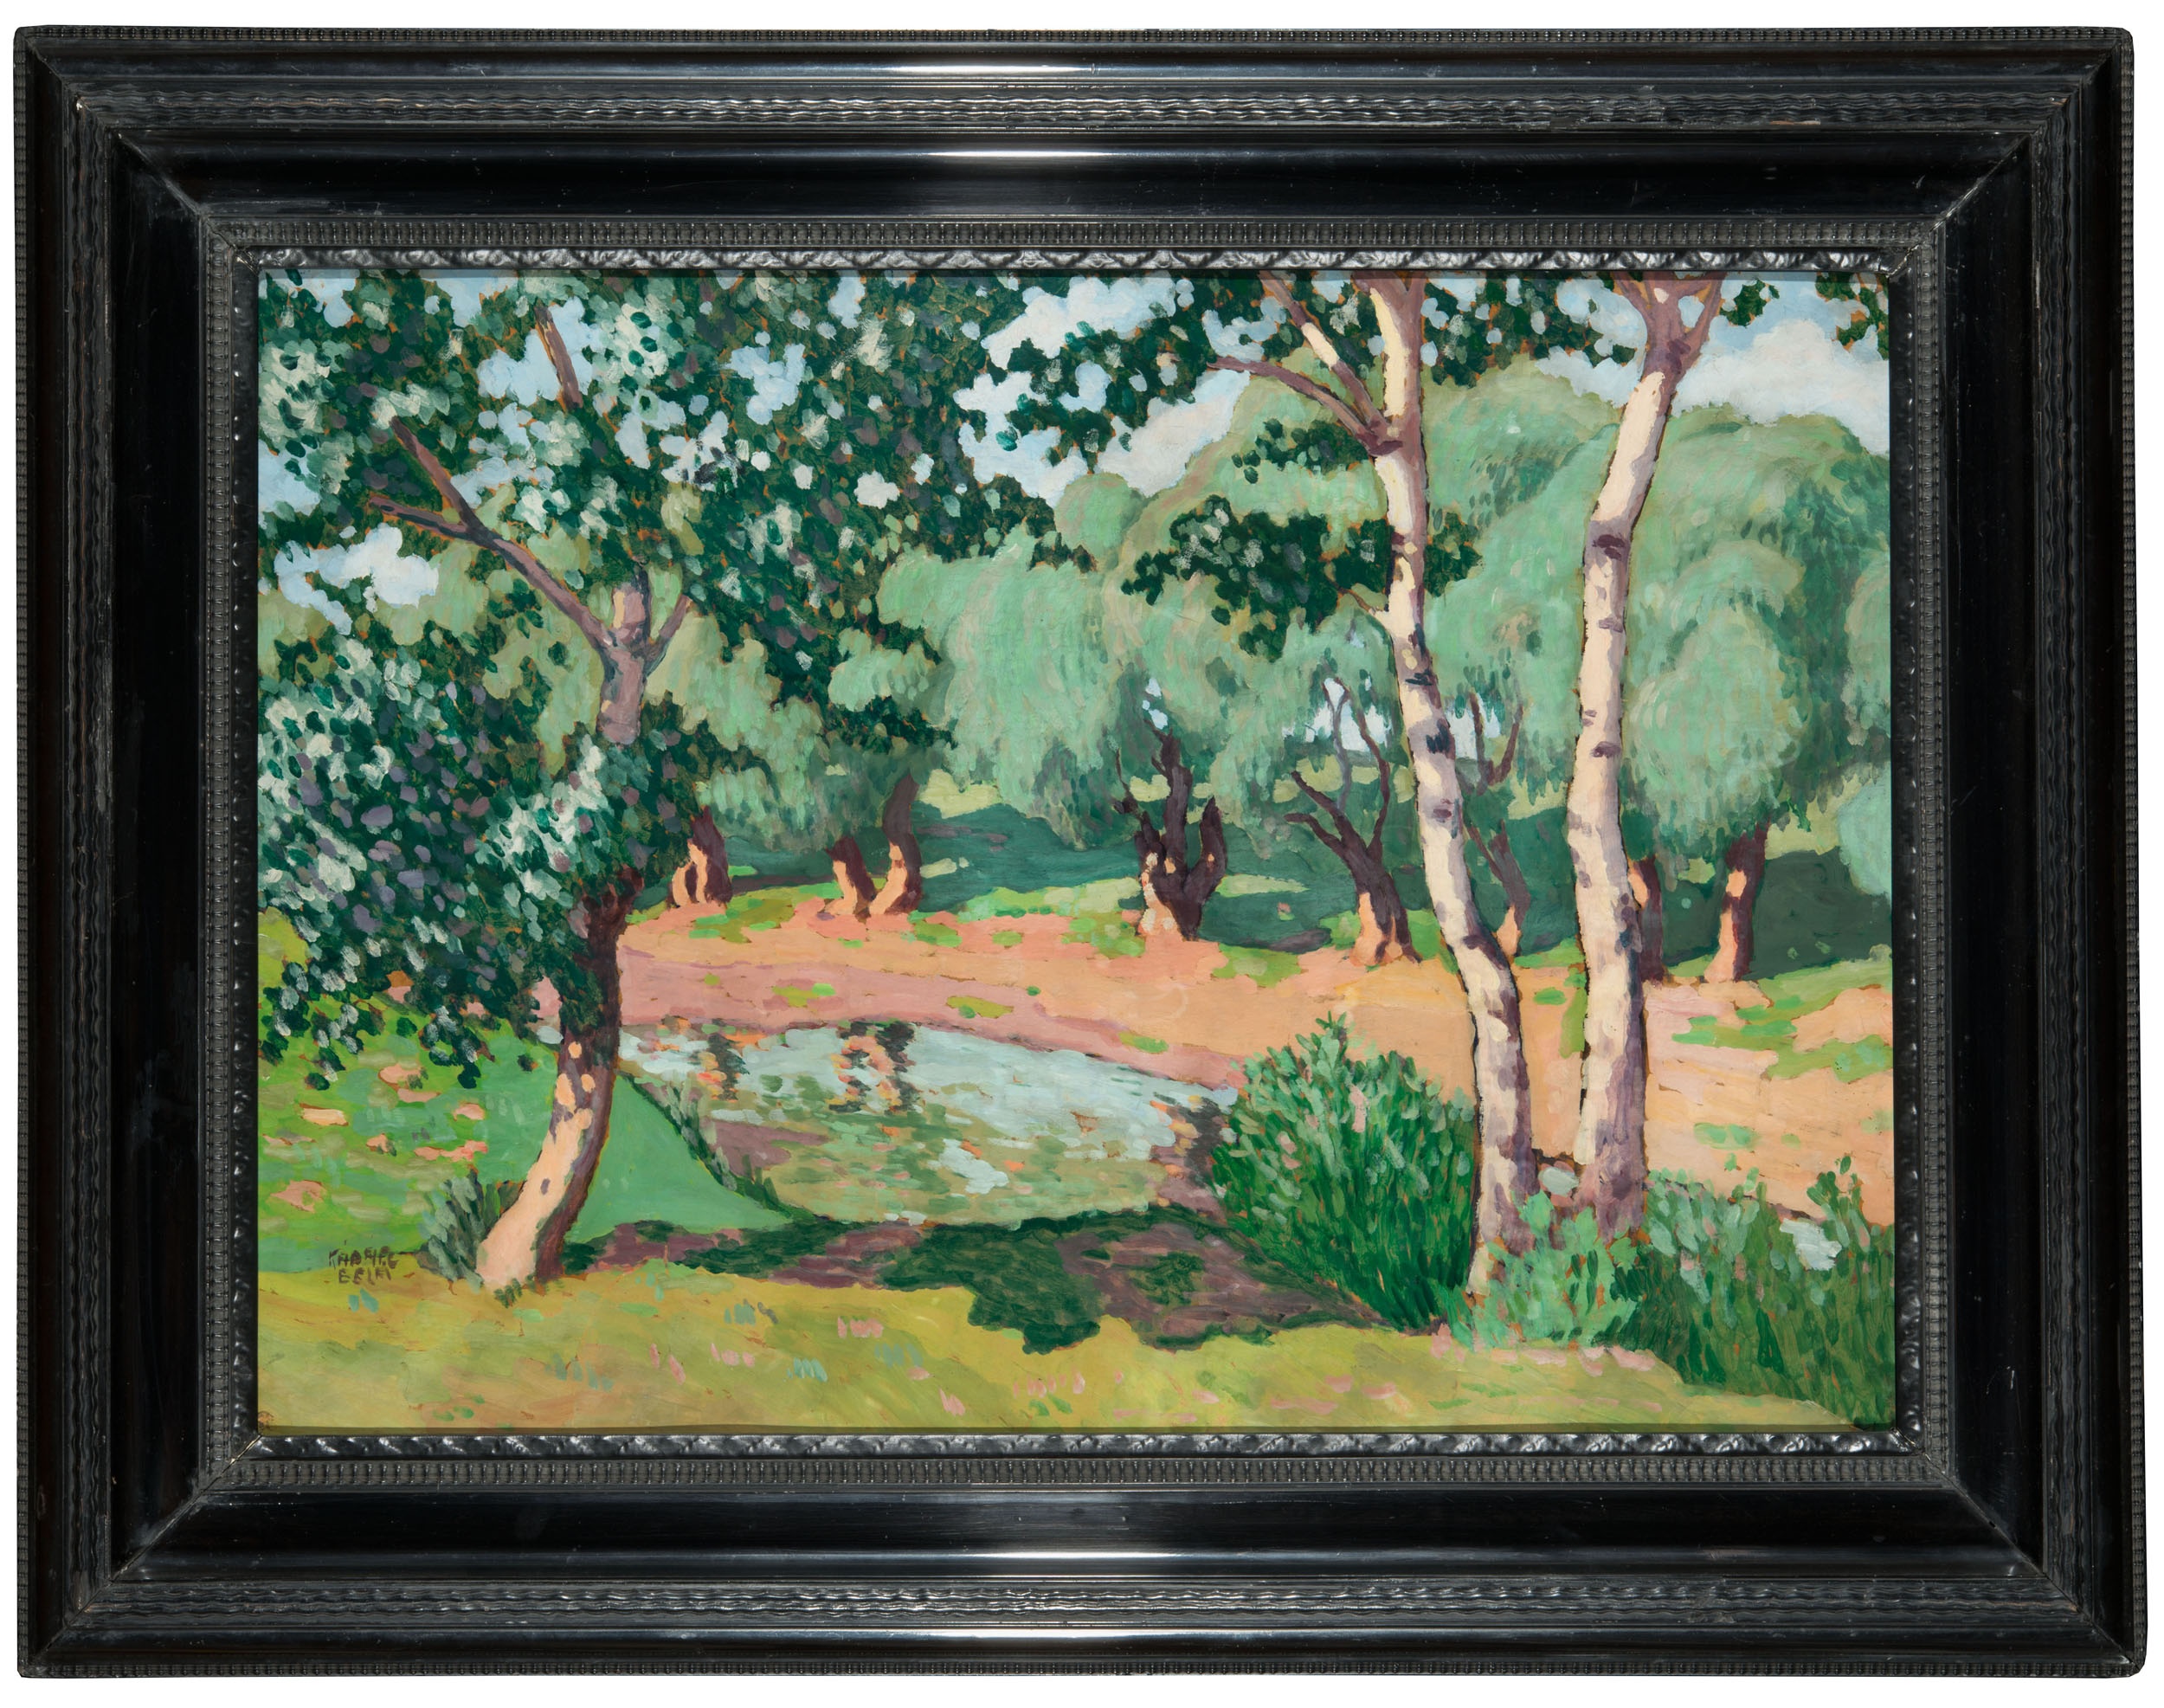 untitled (landscape), (known as “Forest Scene”) (The Salgo Trust for Education CC BY-NC-SA)